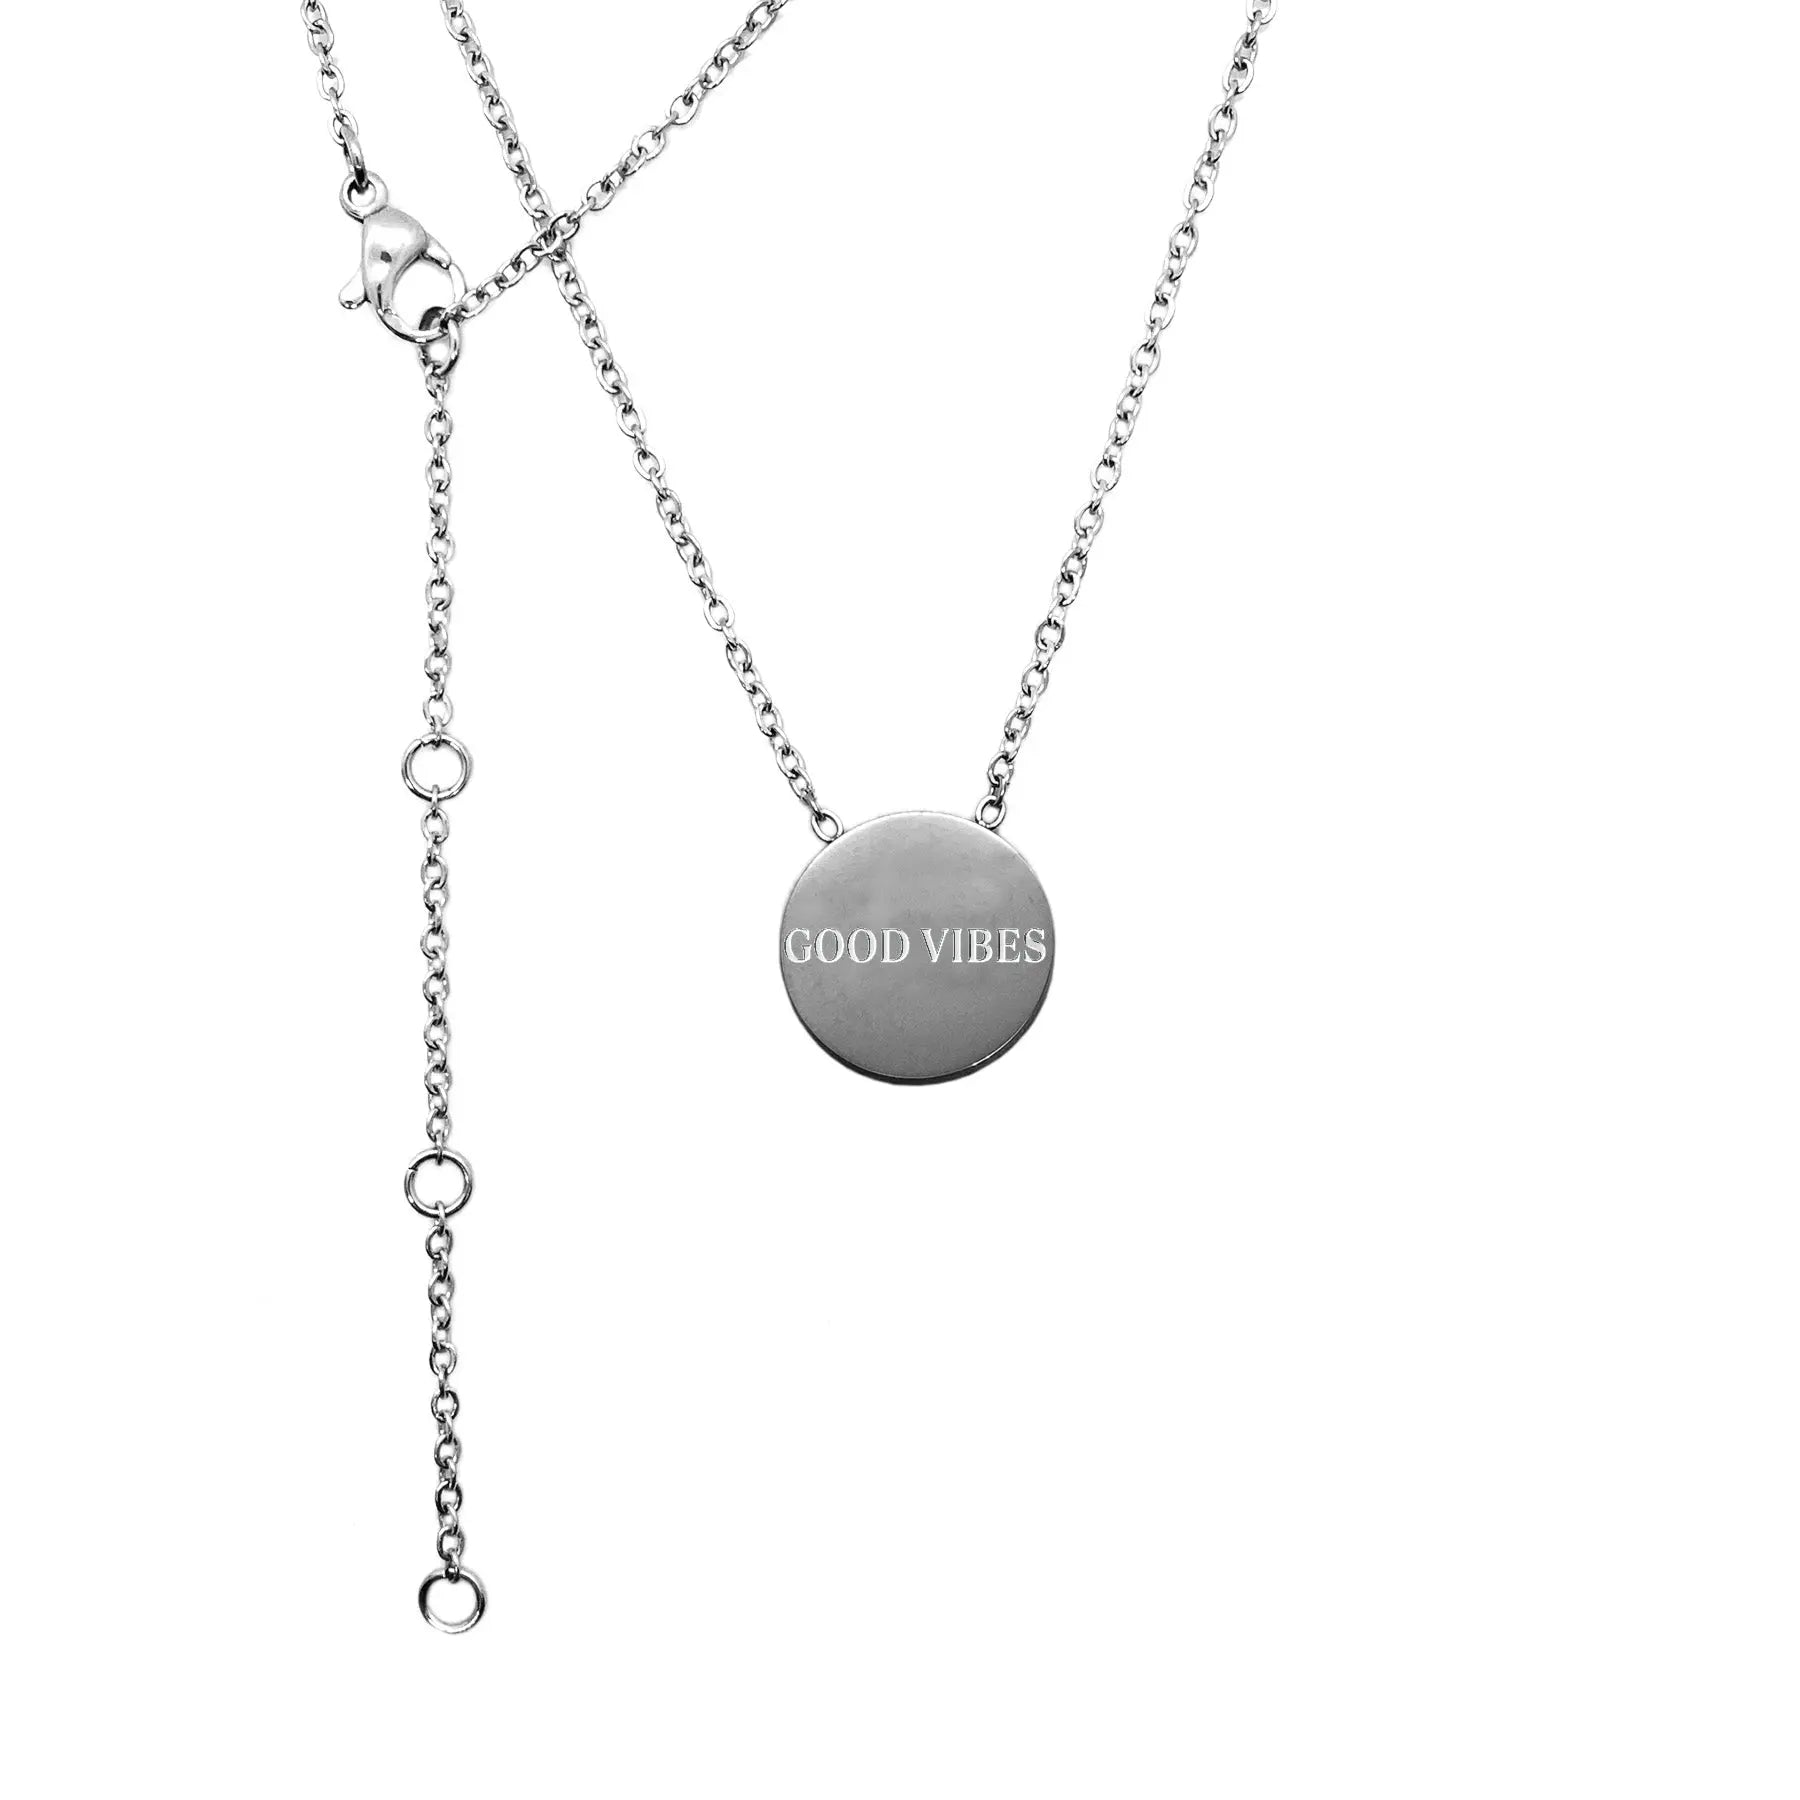 A silver necklace with a circular medallion, featuring Good Vibes text. Stainless steel, 49 cm length, 18 mm medallion size. Durable and polished for lasting wear.